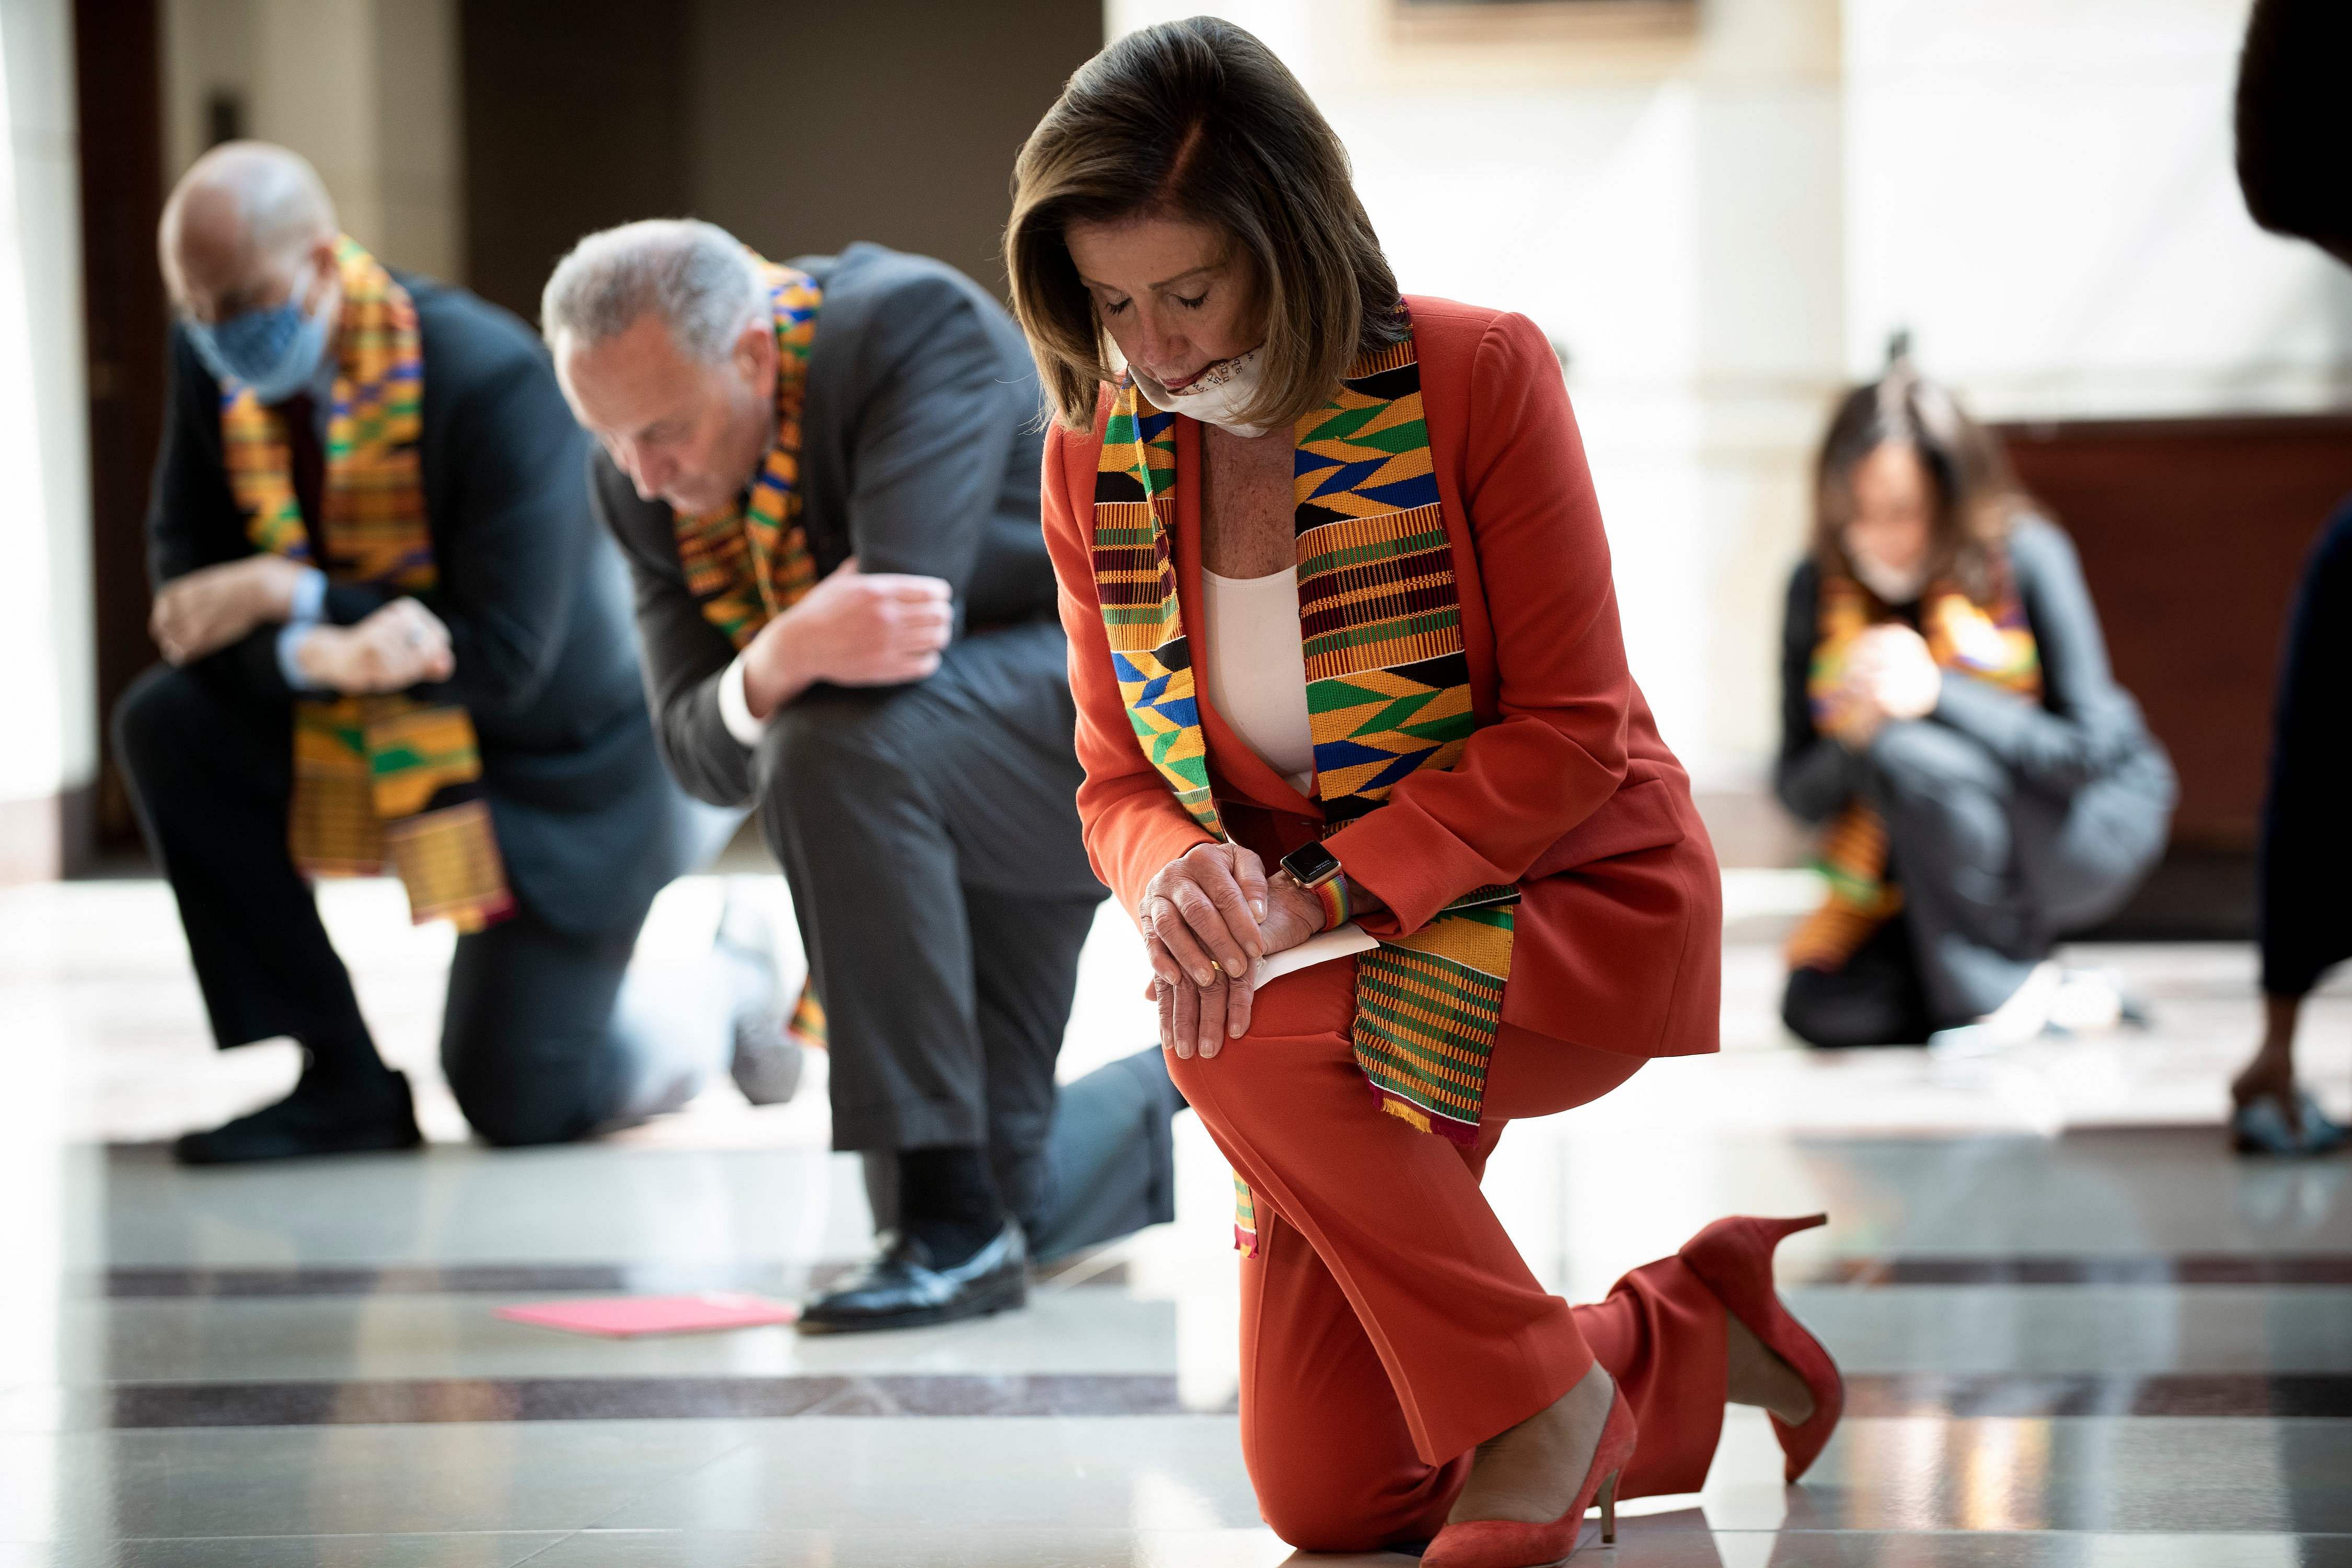 Speaker of the House Nancy Pelosi (D-CA) and other Democratic lawmakers take a knee to observe a moment of silence on Capitol Hill for George Floyd and other victims of police brutality. Credit: AFP Photo